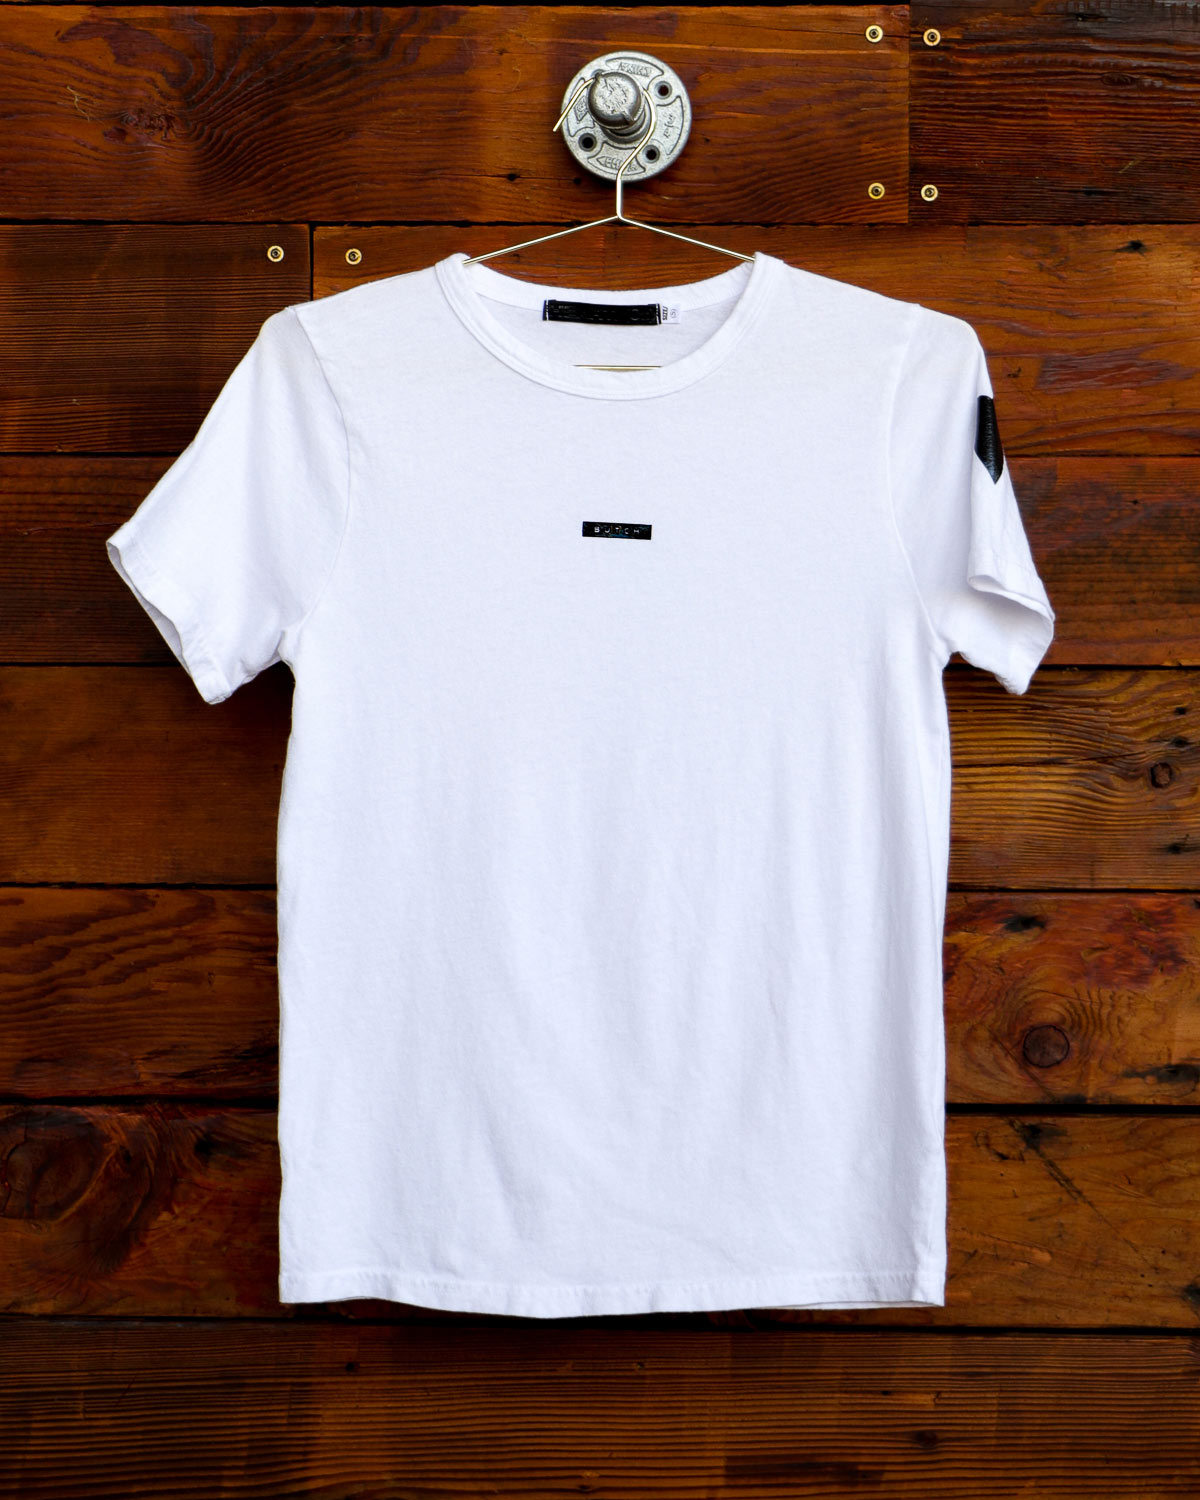 White Butch label t-shirt hanging on weathered wood wall